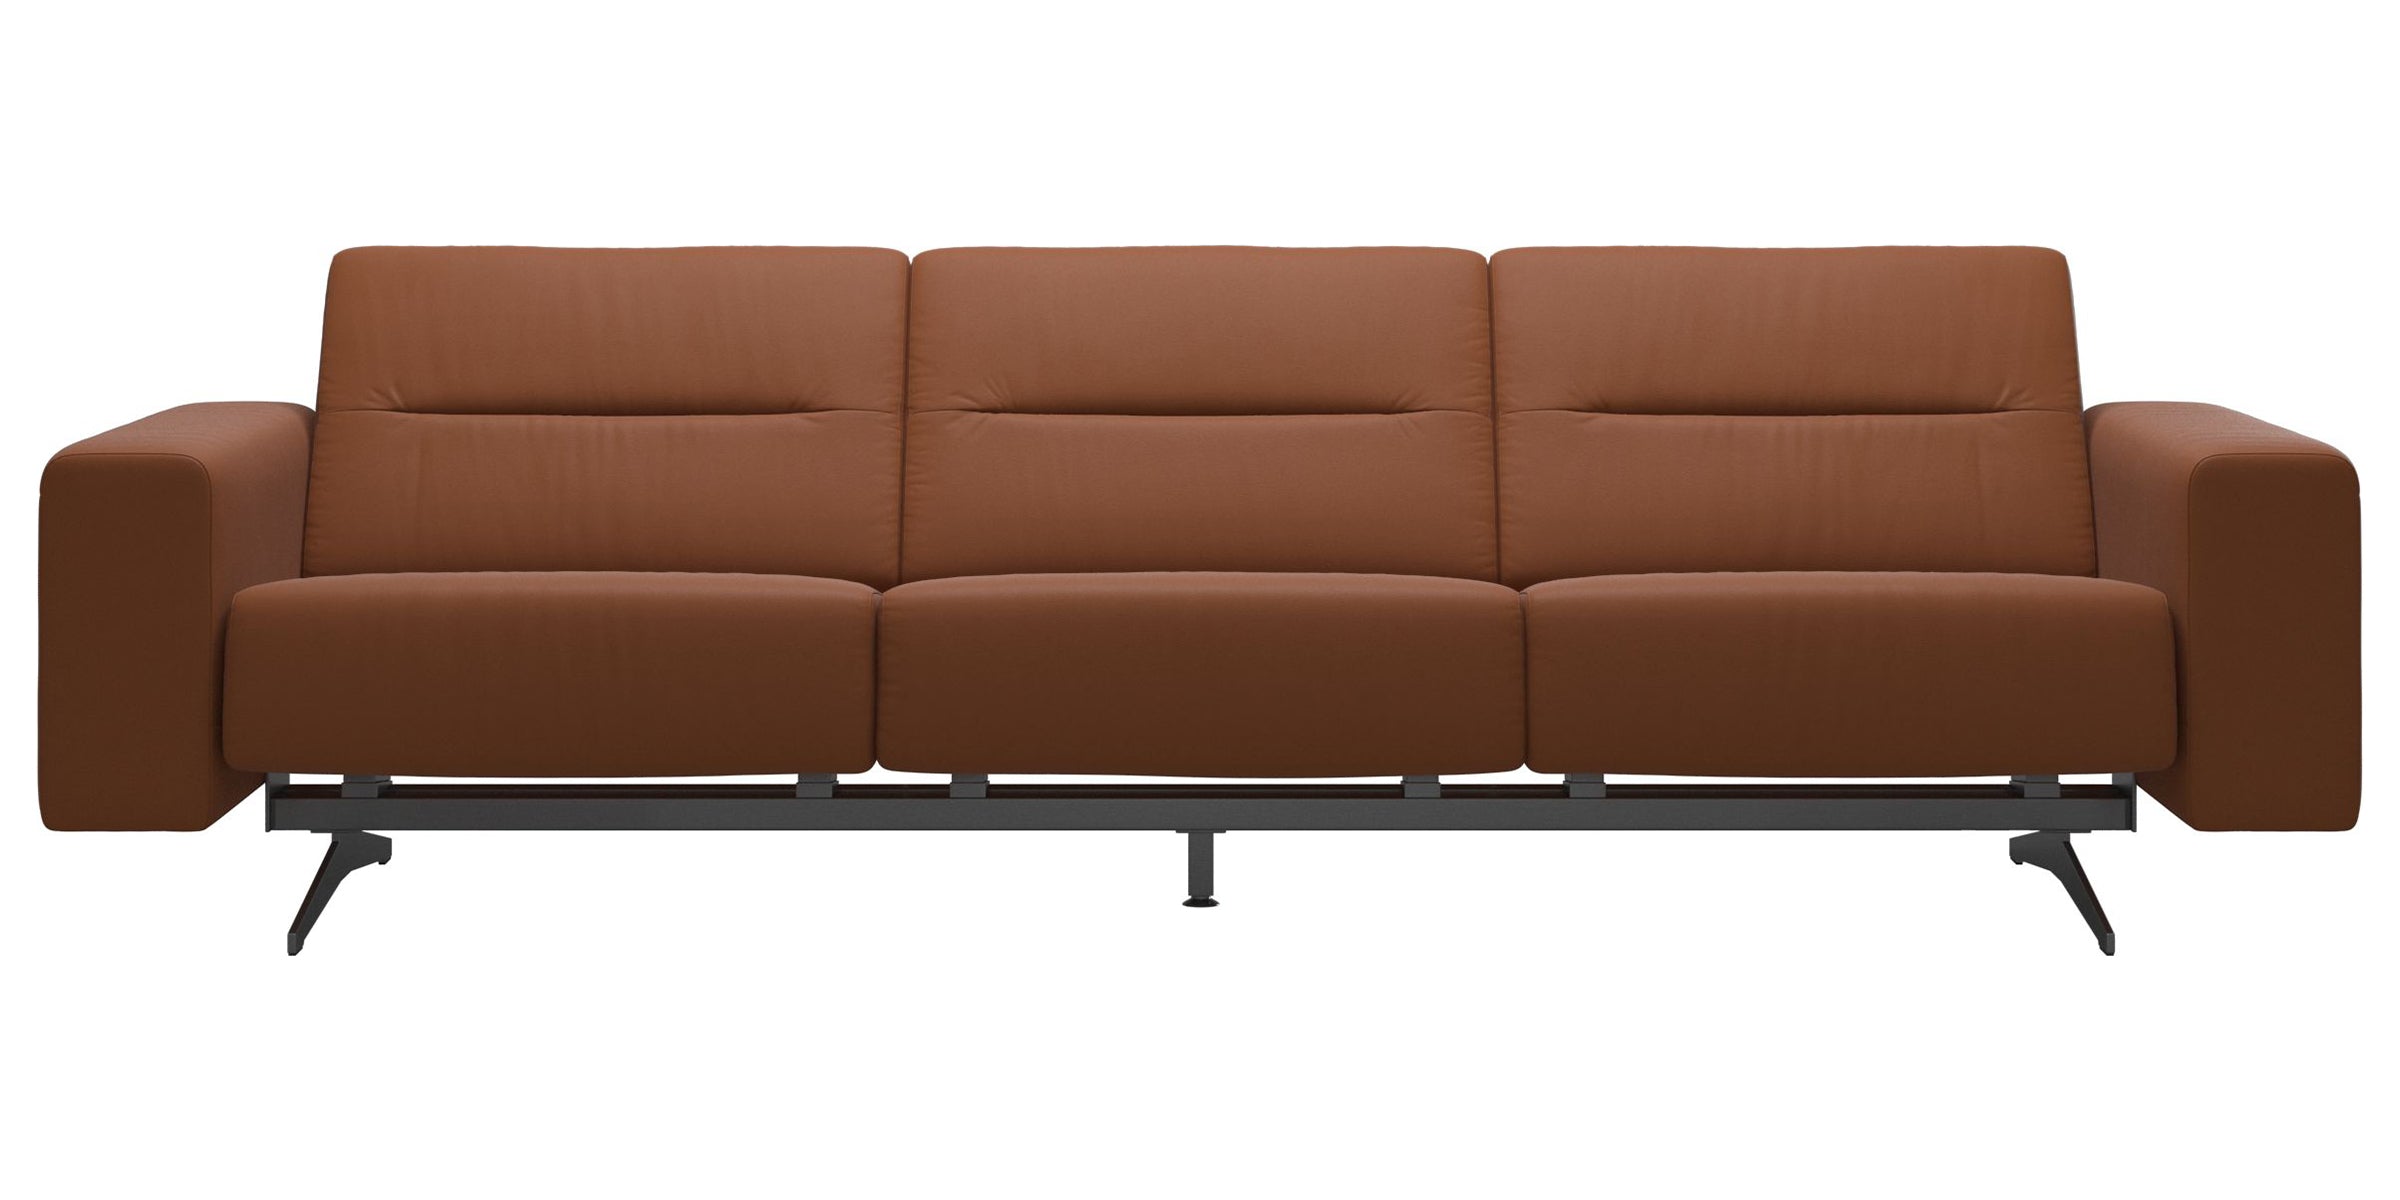 Paloma Leather New Cognac & Chrome Base | Stressless Stella 3-Seater Sofa with S1 Arm | Valley Ridge Furniture